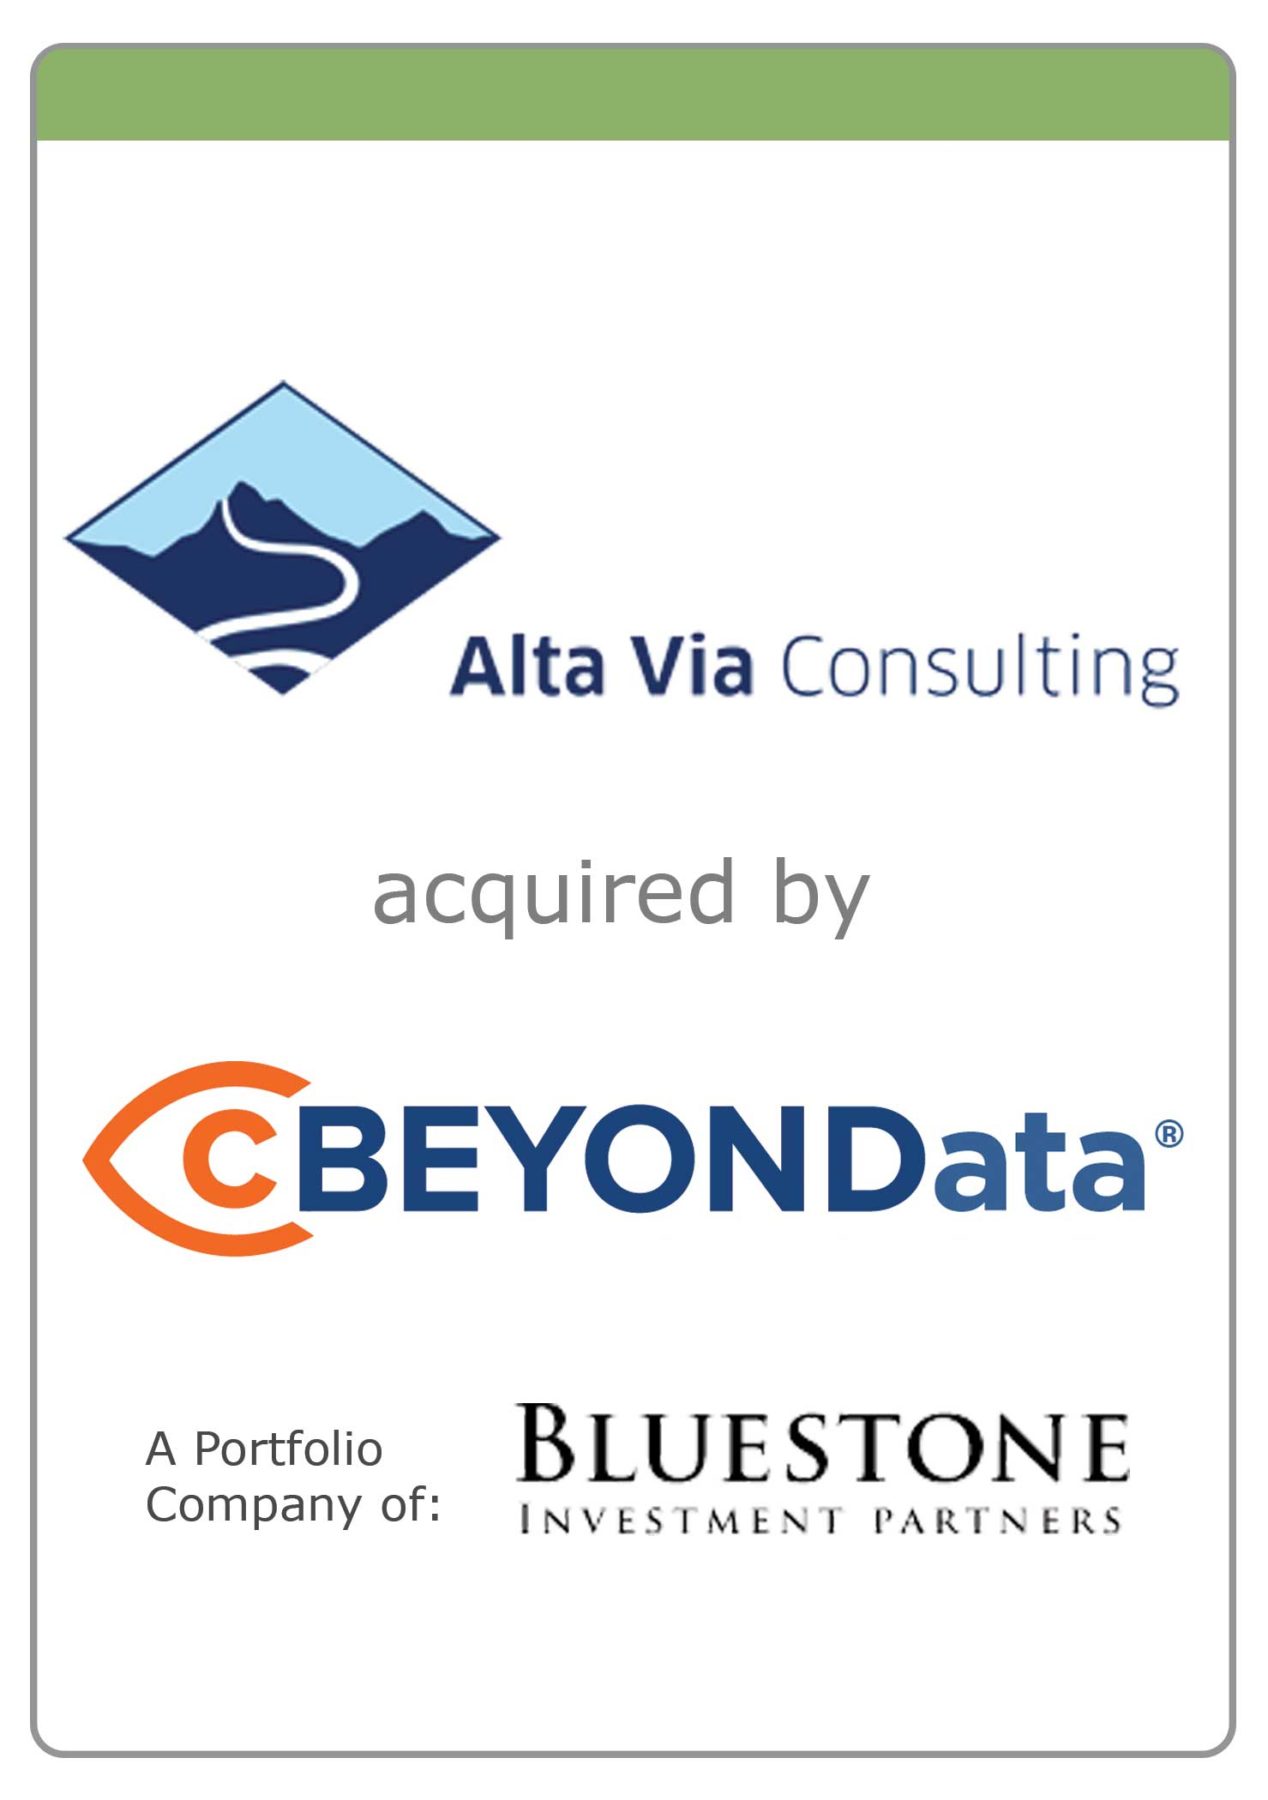 Alta Via Consulting Acquired By cBEYONData a Bluestone Investment Partners Company